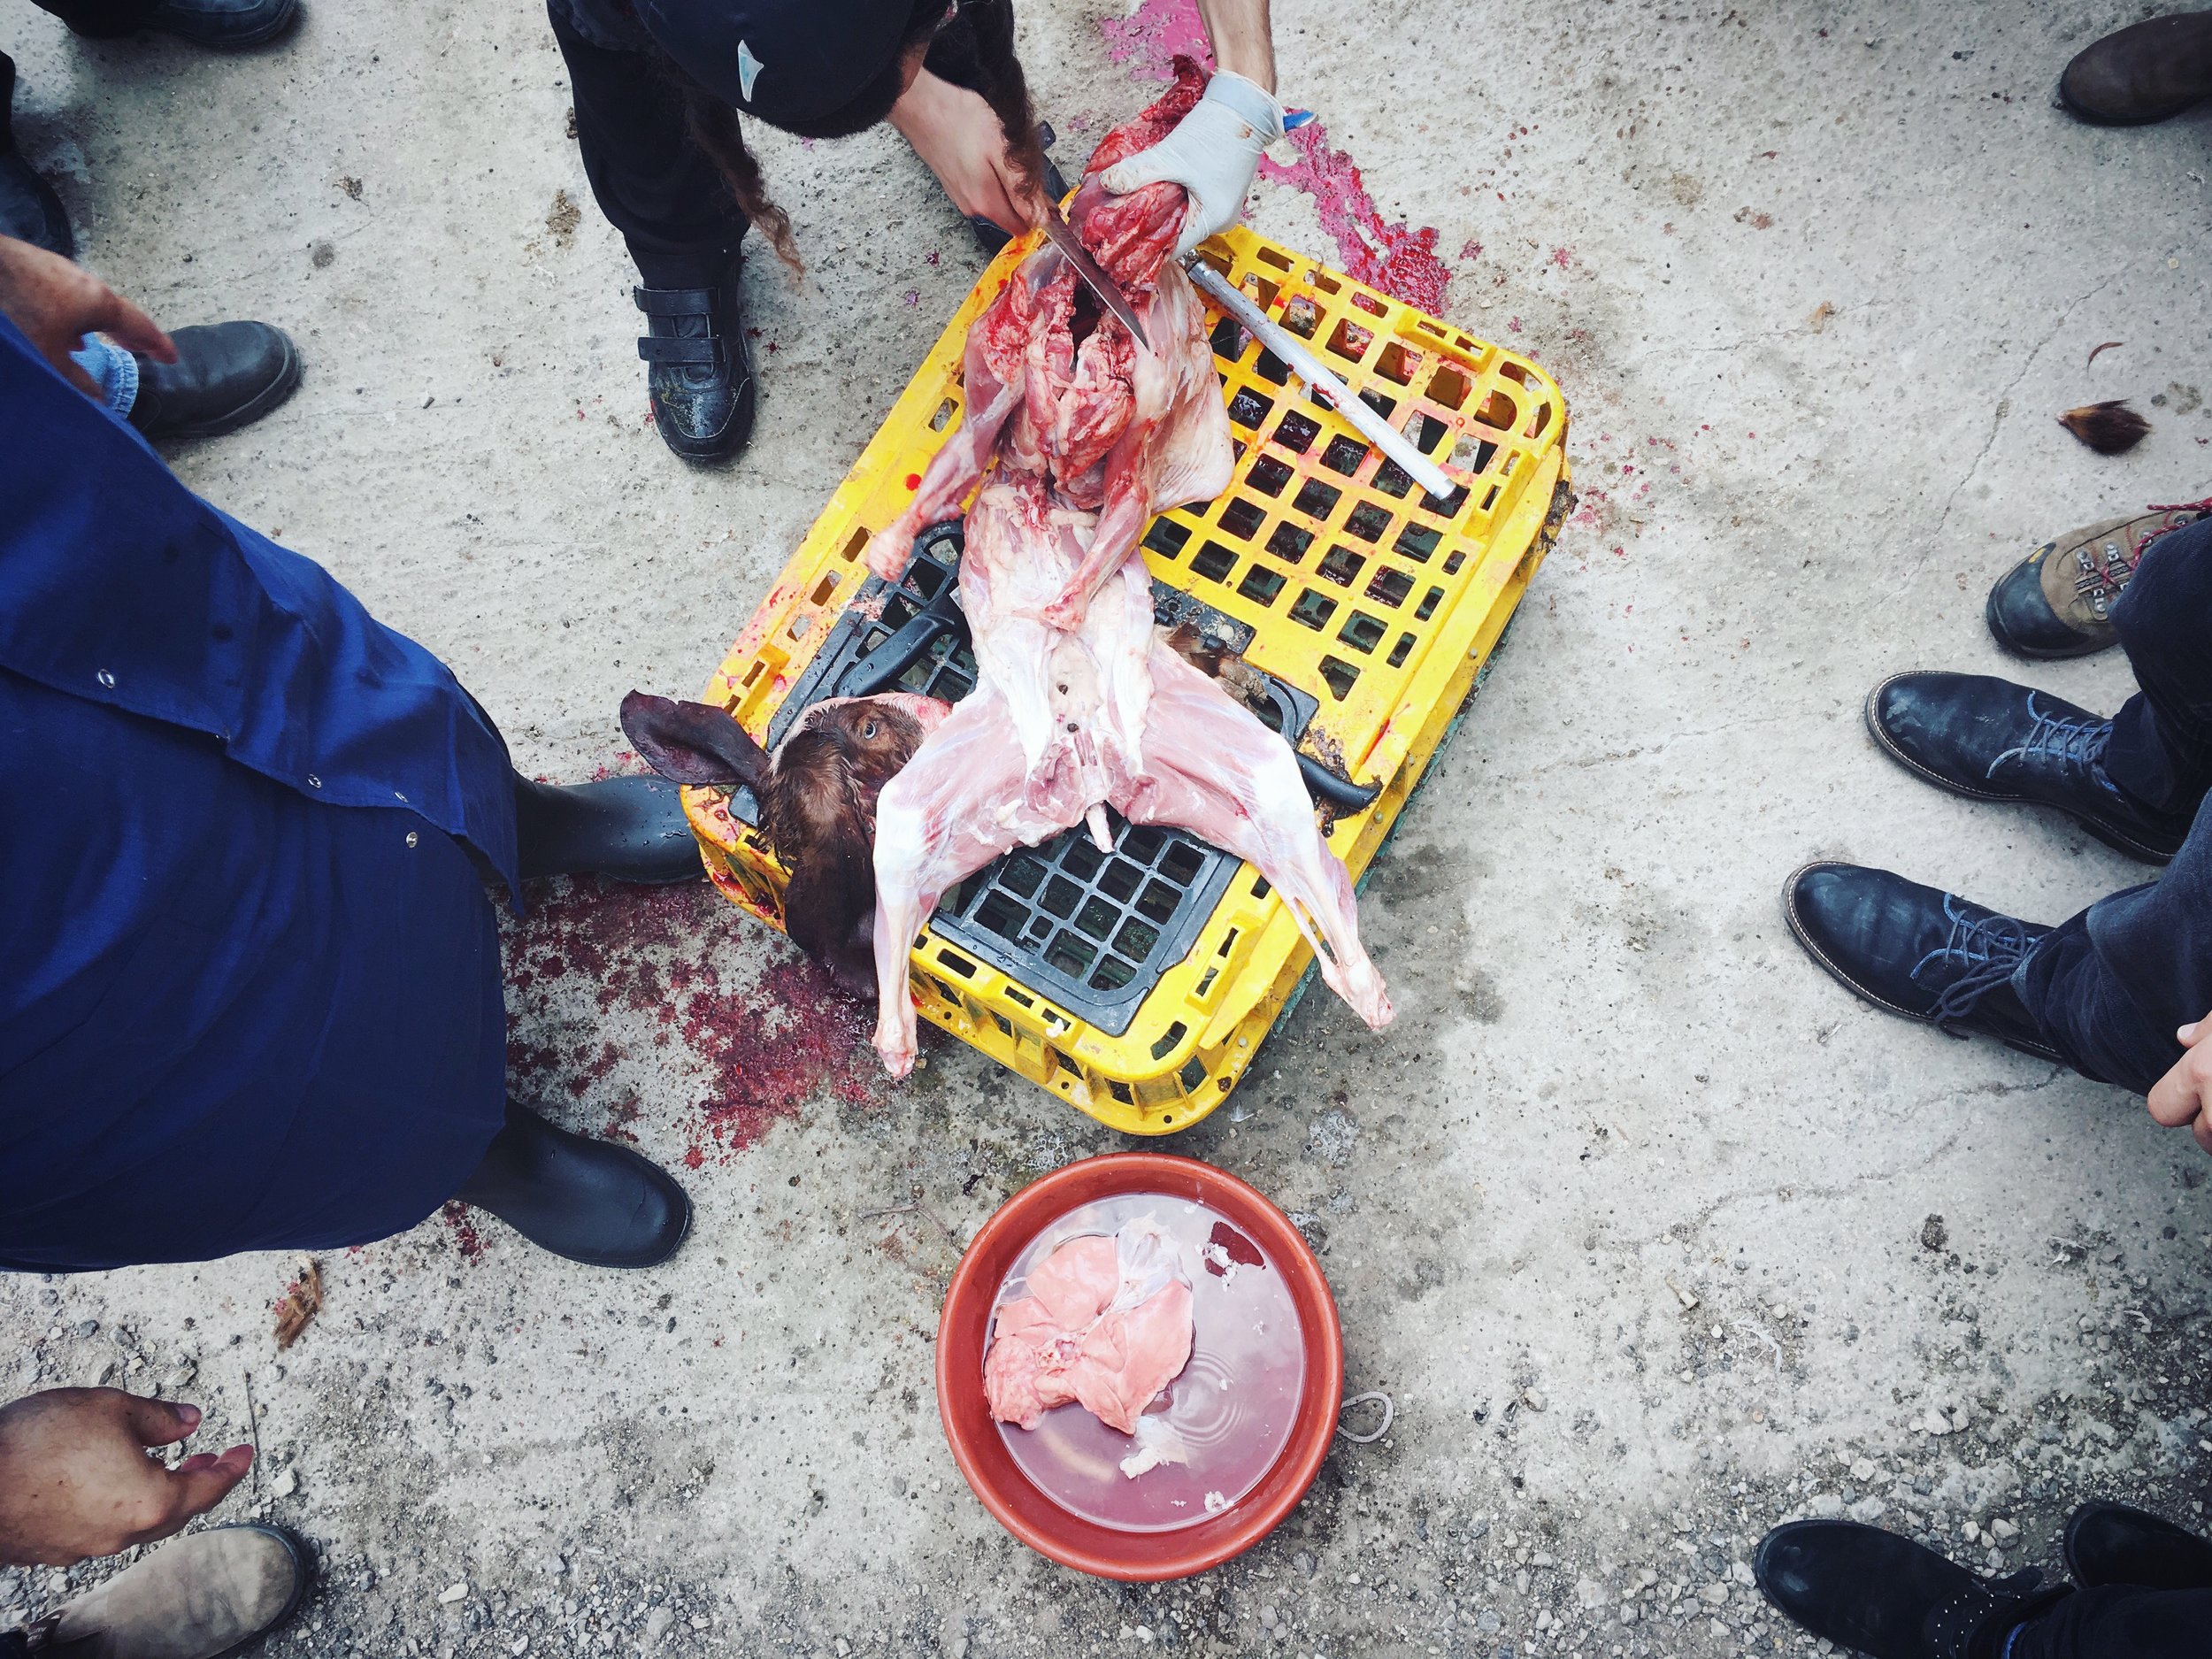  Rabbis talk about Kashrut policy in Israel while performing ritual slaughter on a baby goat 